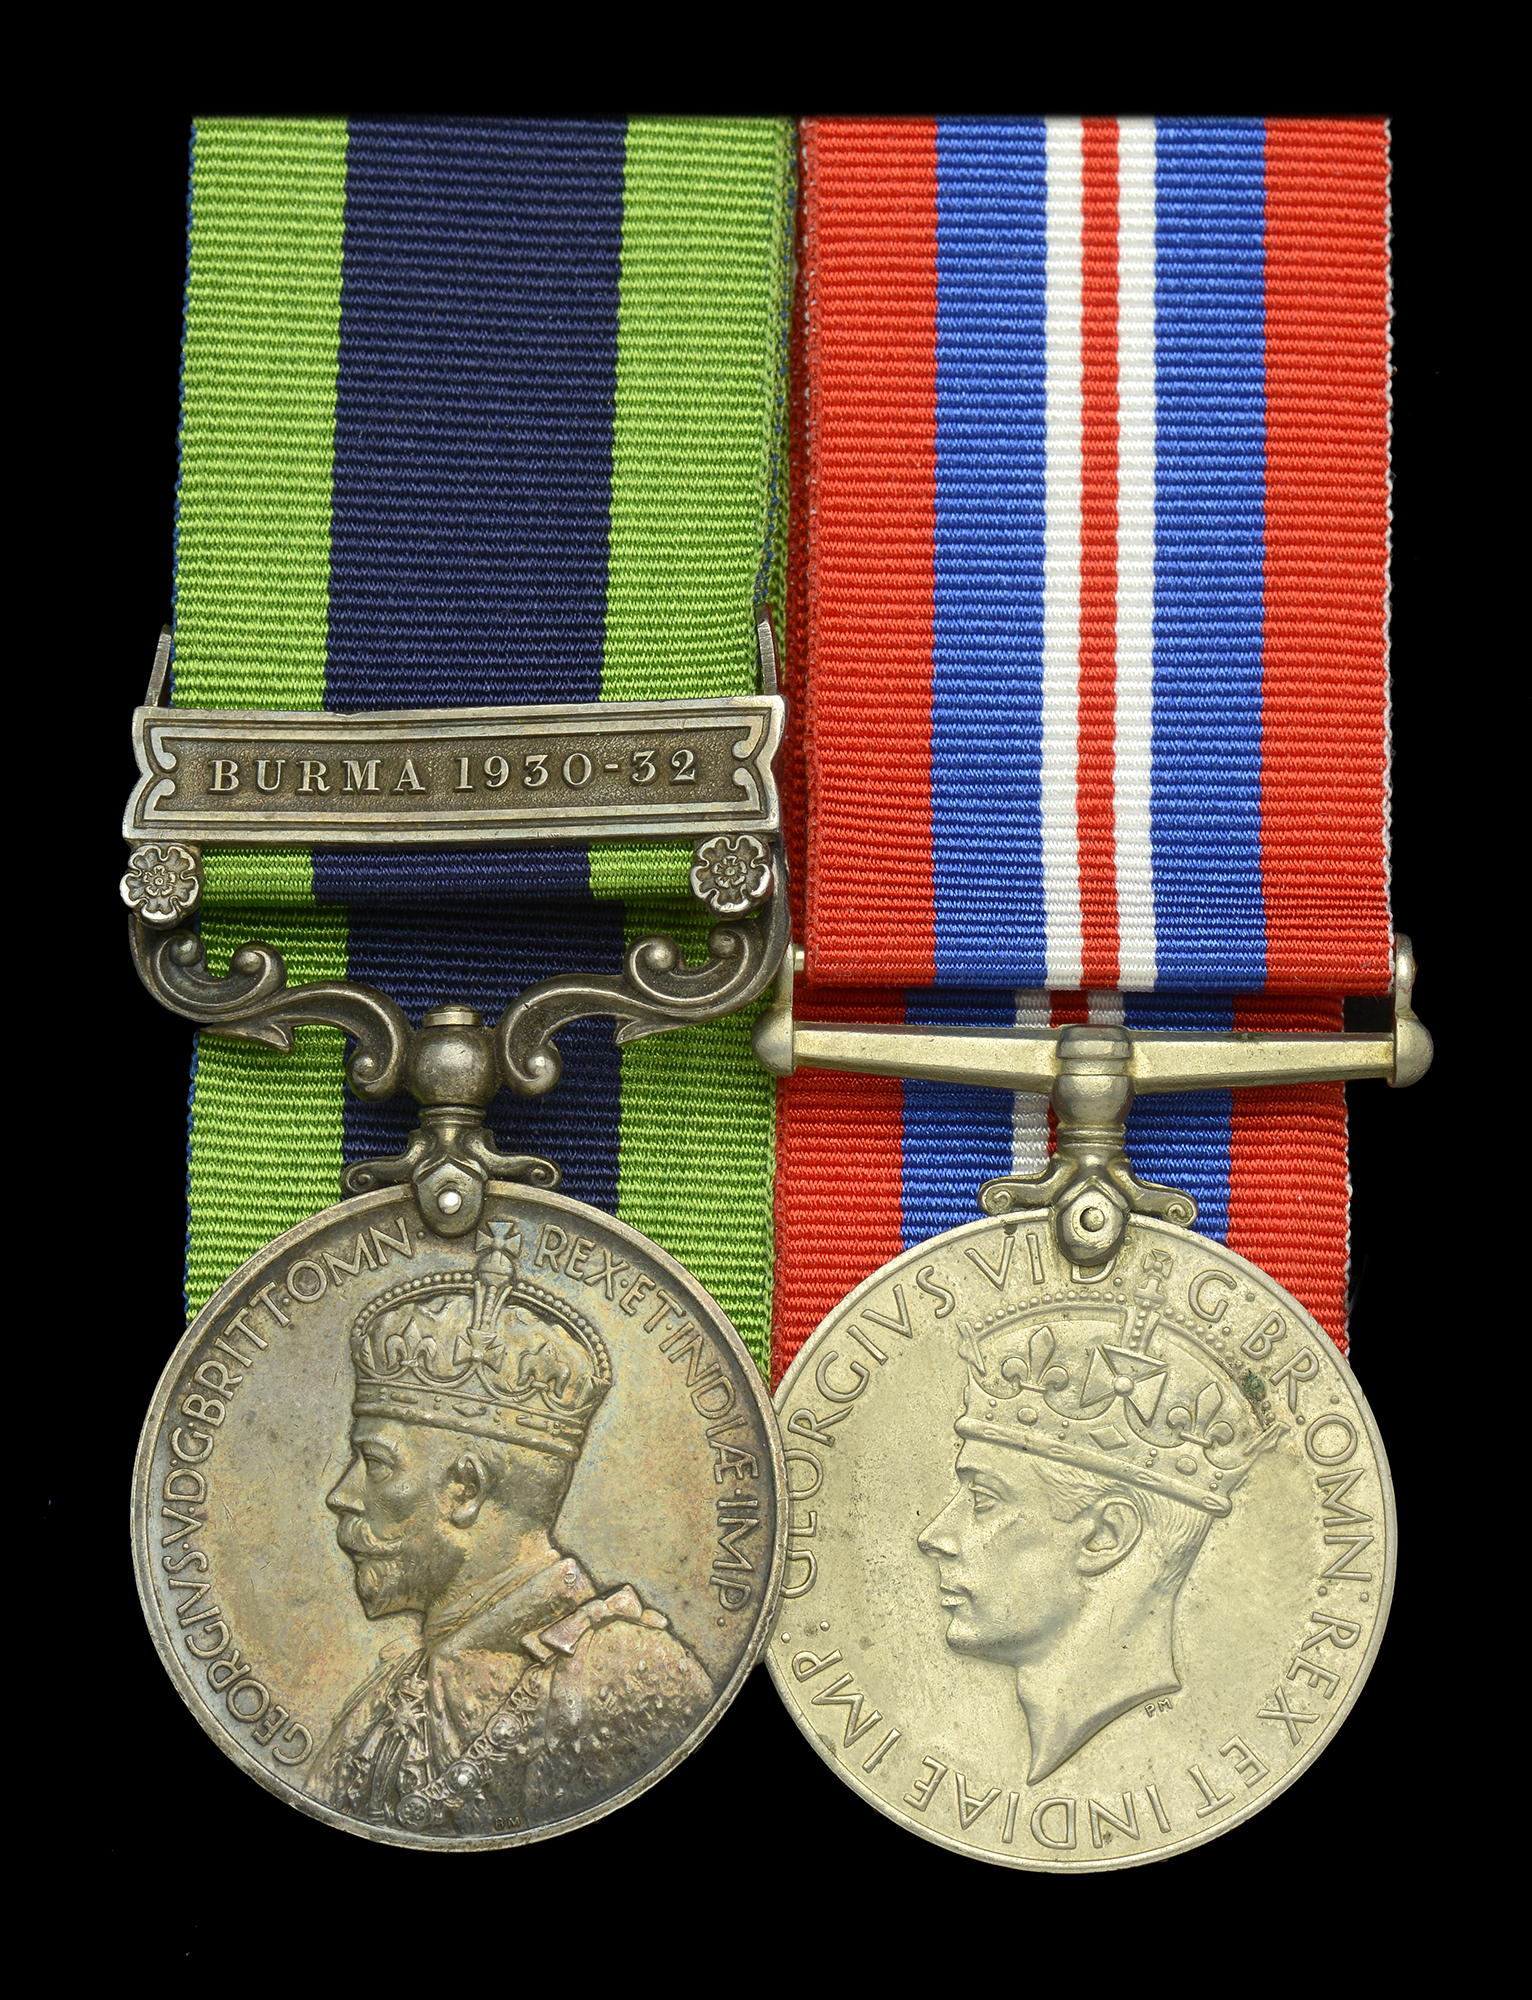 Pair: Private S. Booth, Manchester Regiment India General Service 1908-35, 1 clasp, Burma...